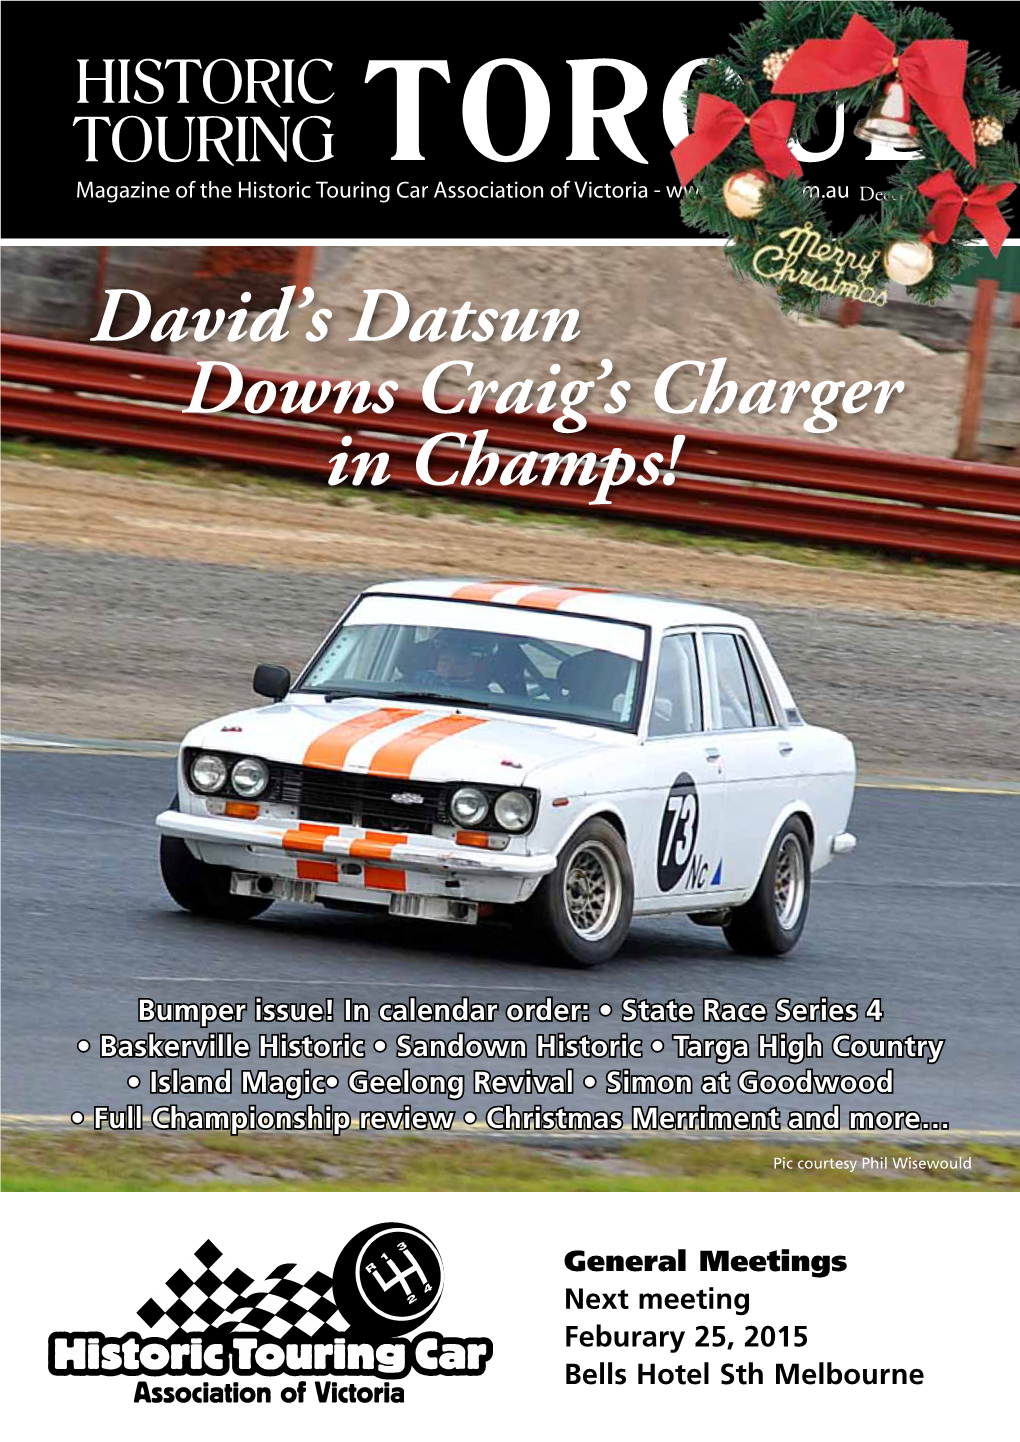 David's Datsun Downs Craig's Charger in Champs!